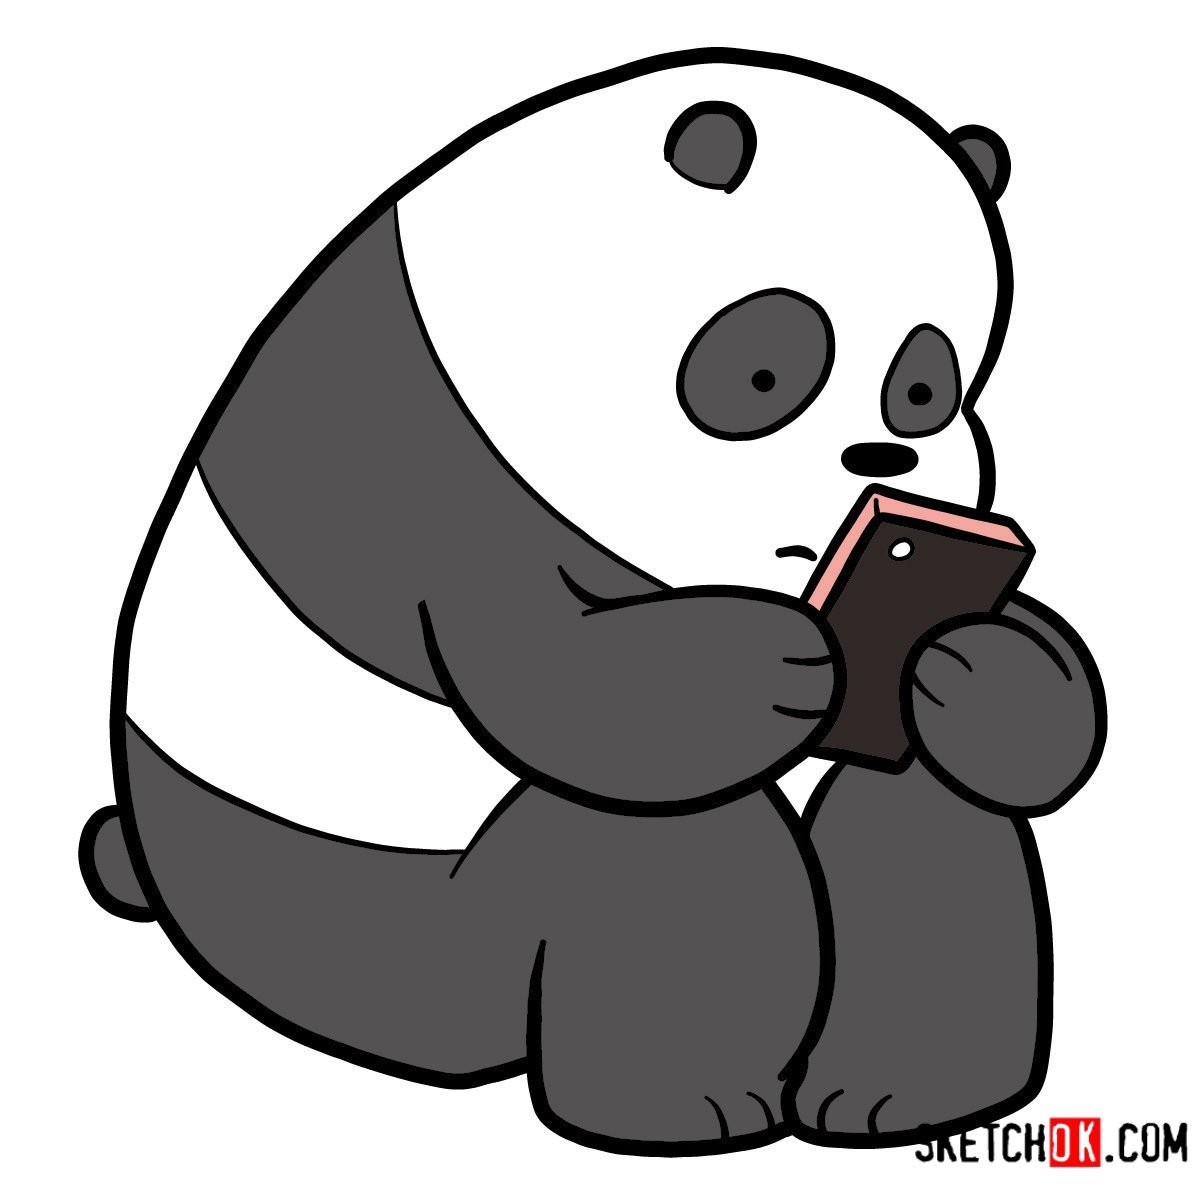 How to draw Panda Bear with a smartphone